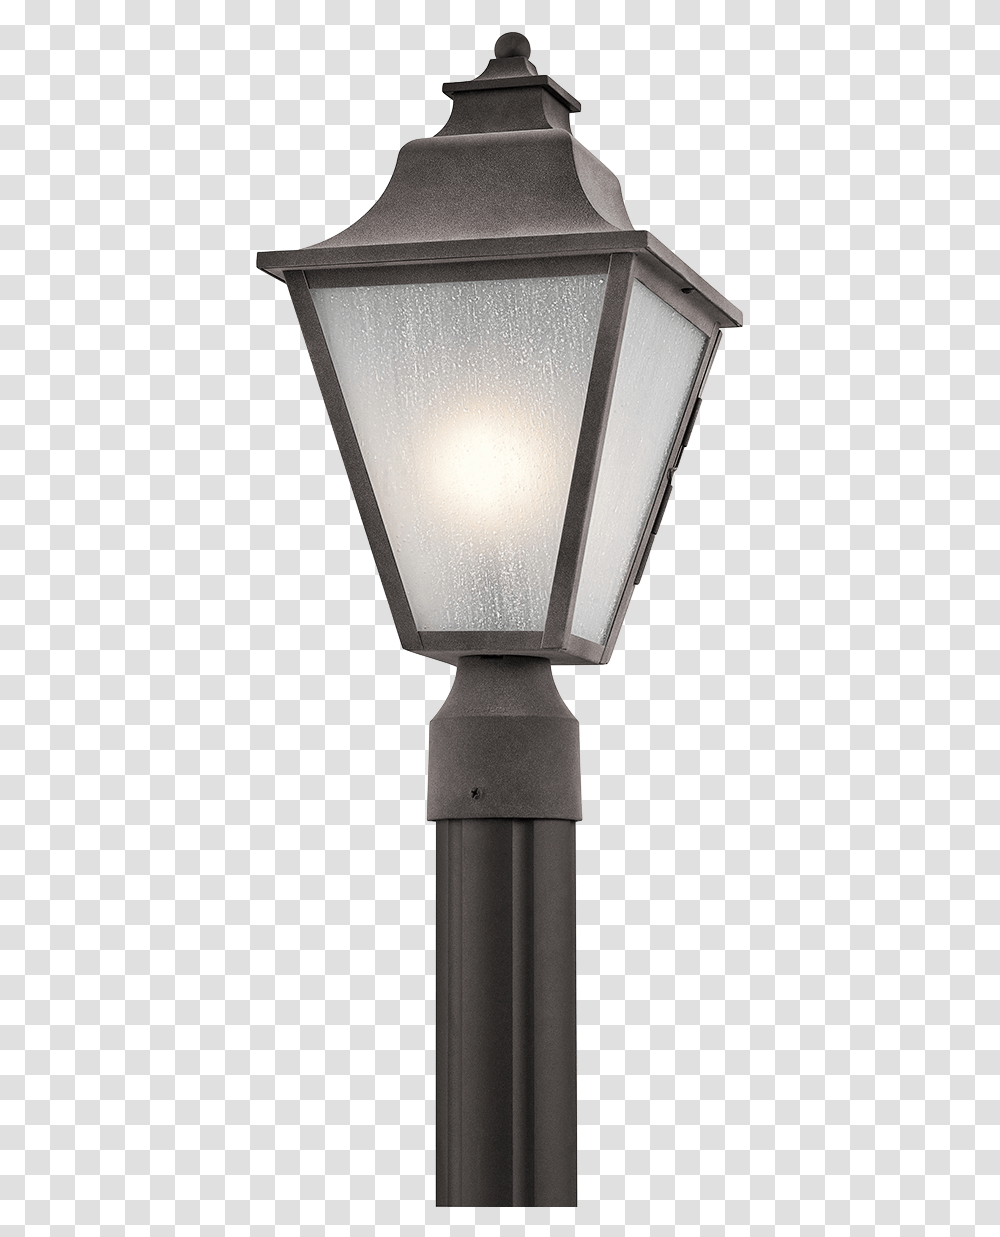 Light Post Clipart, Lamp, Lampshade Transparent Png